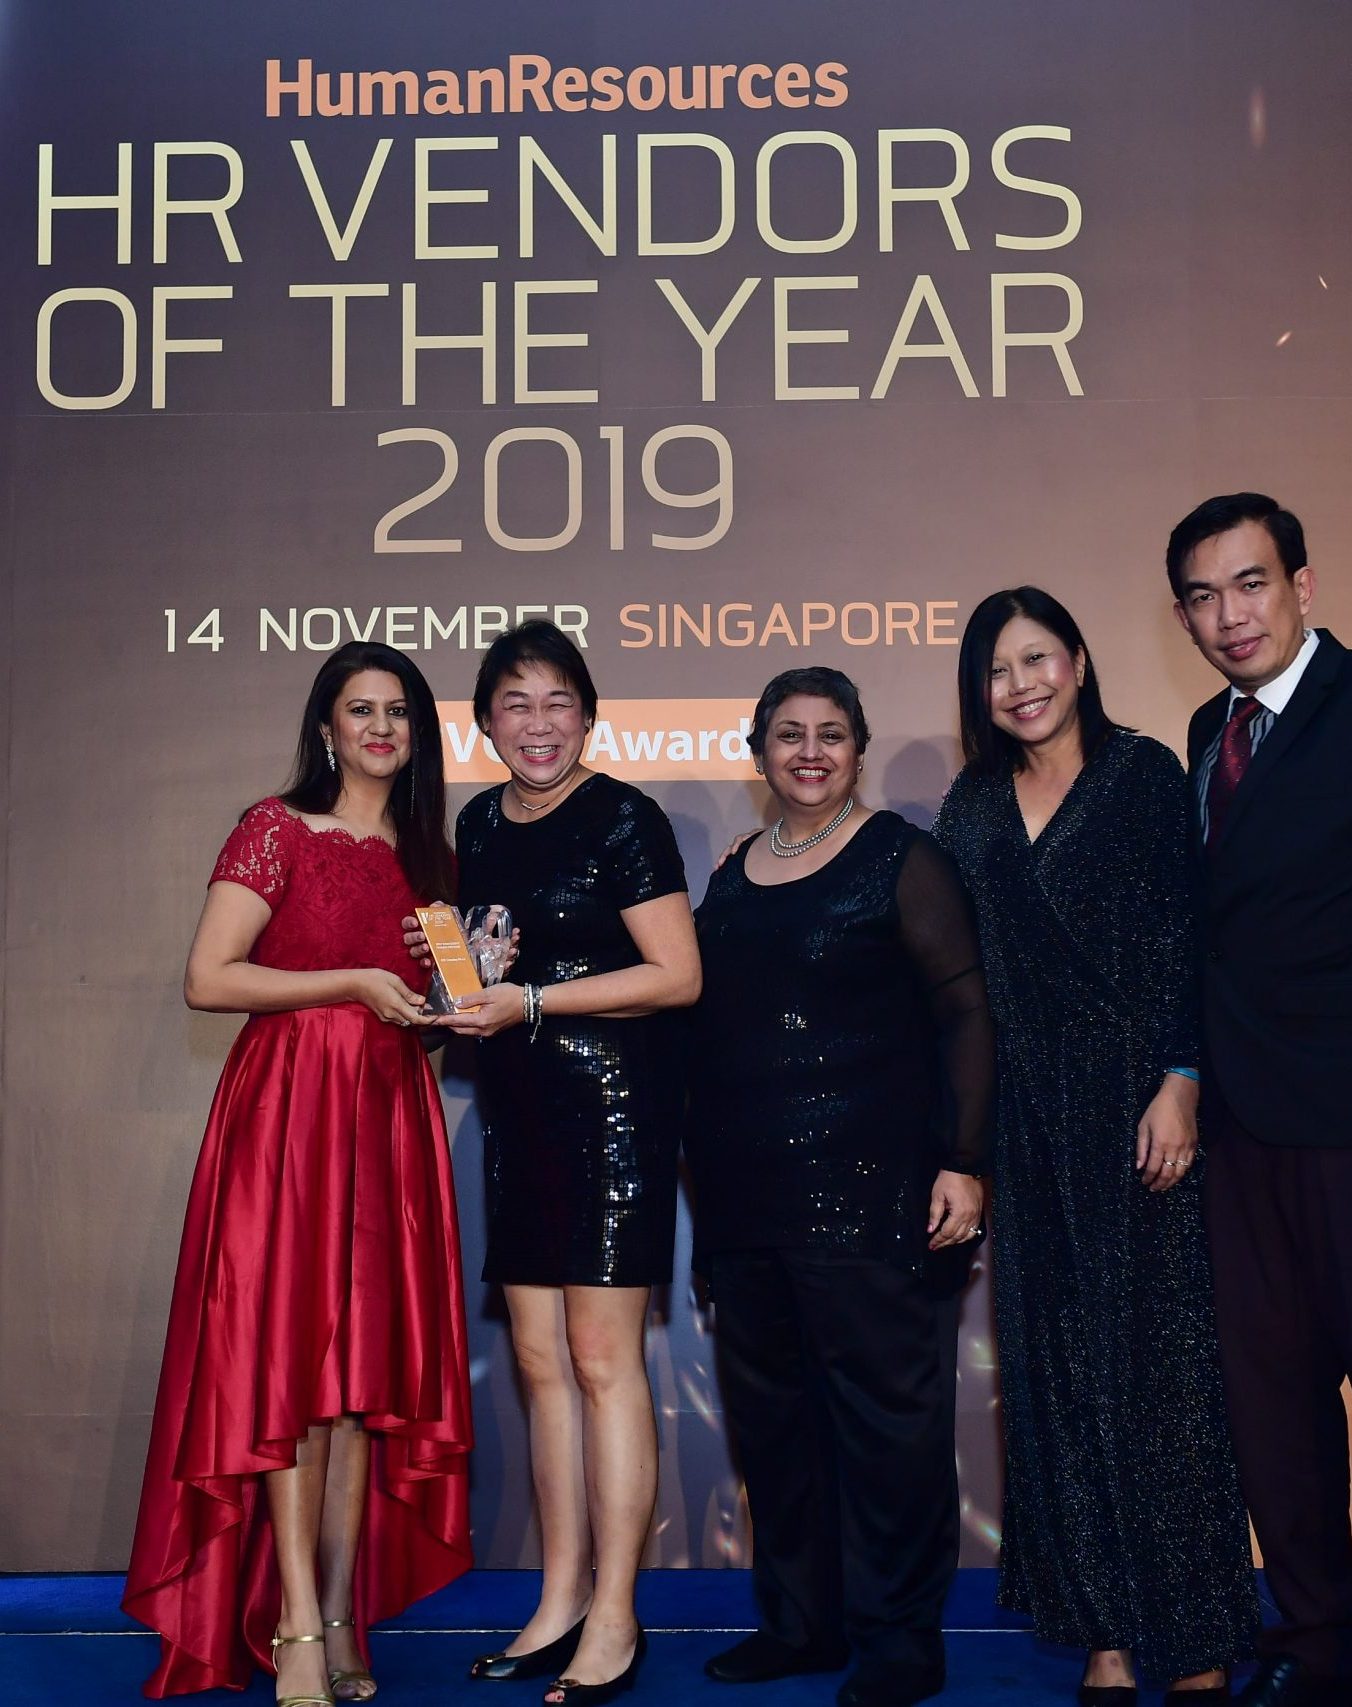 HR vendors of the Year 2019